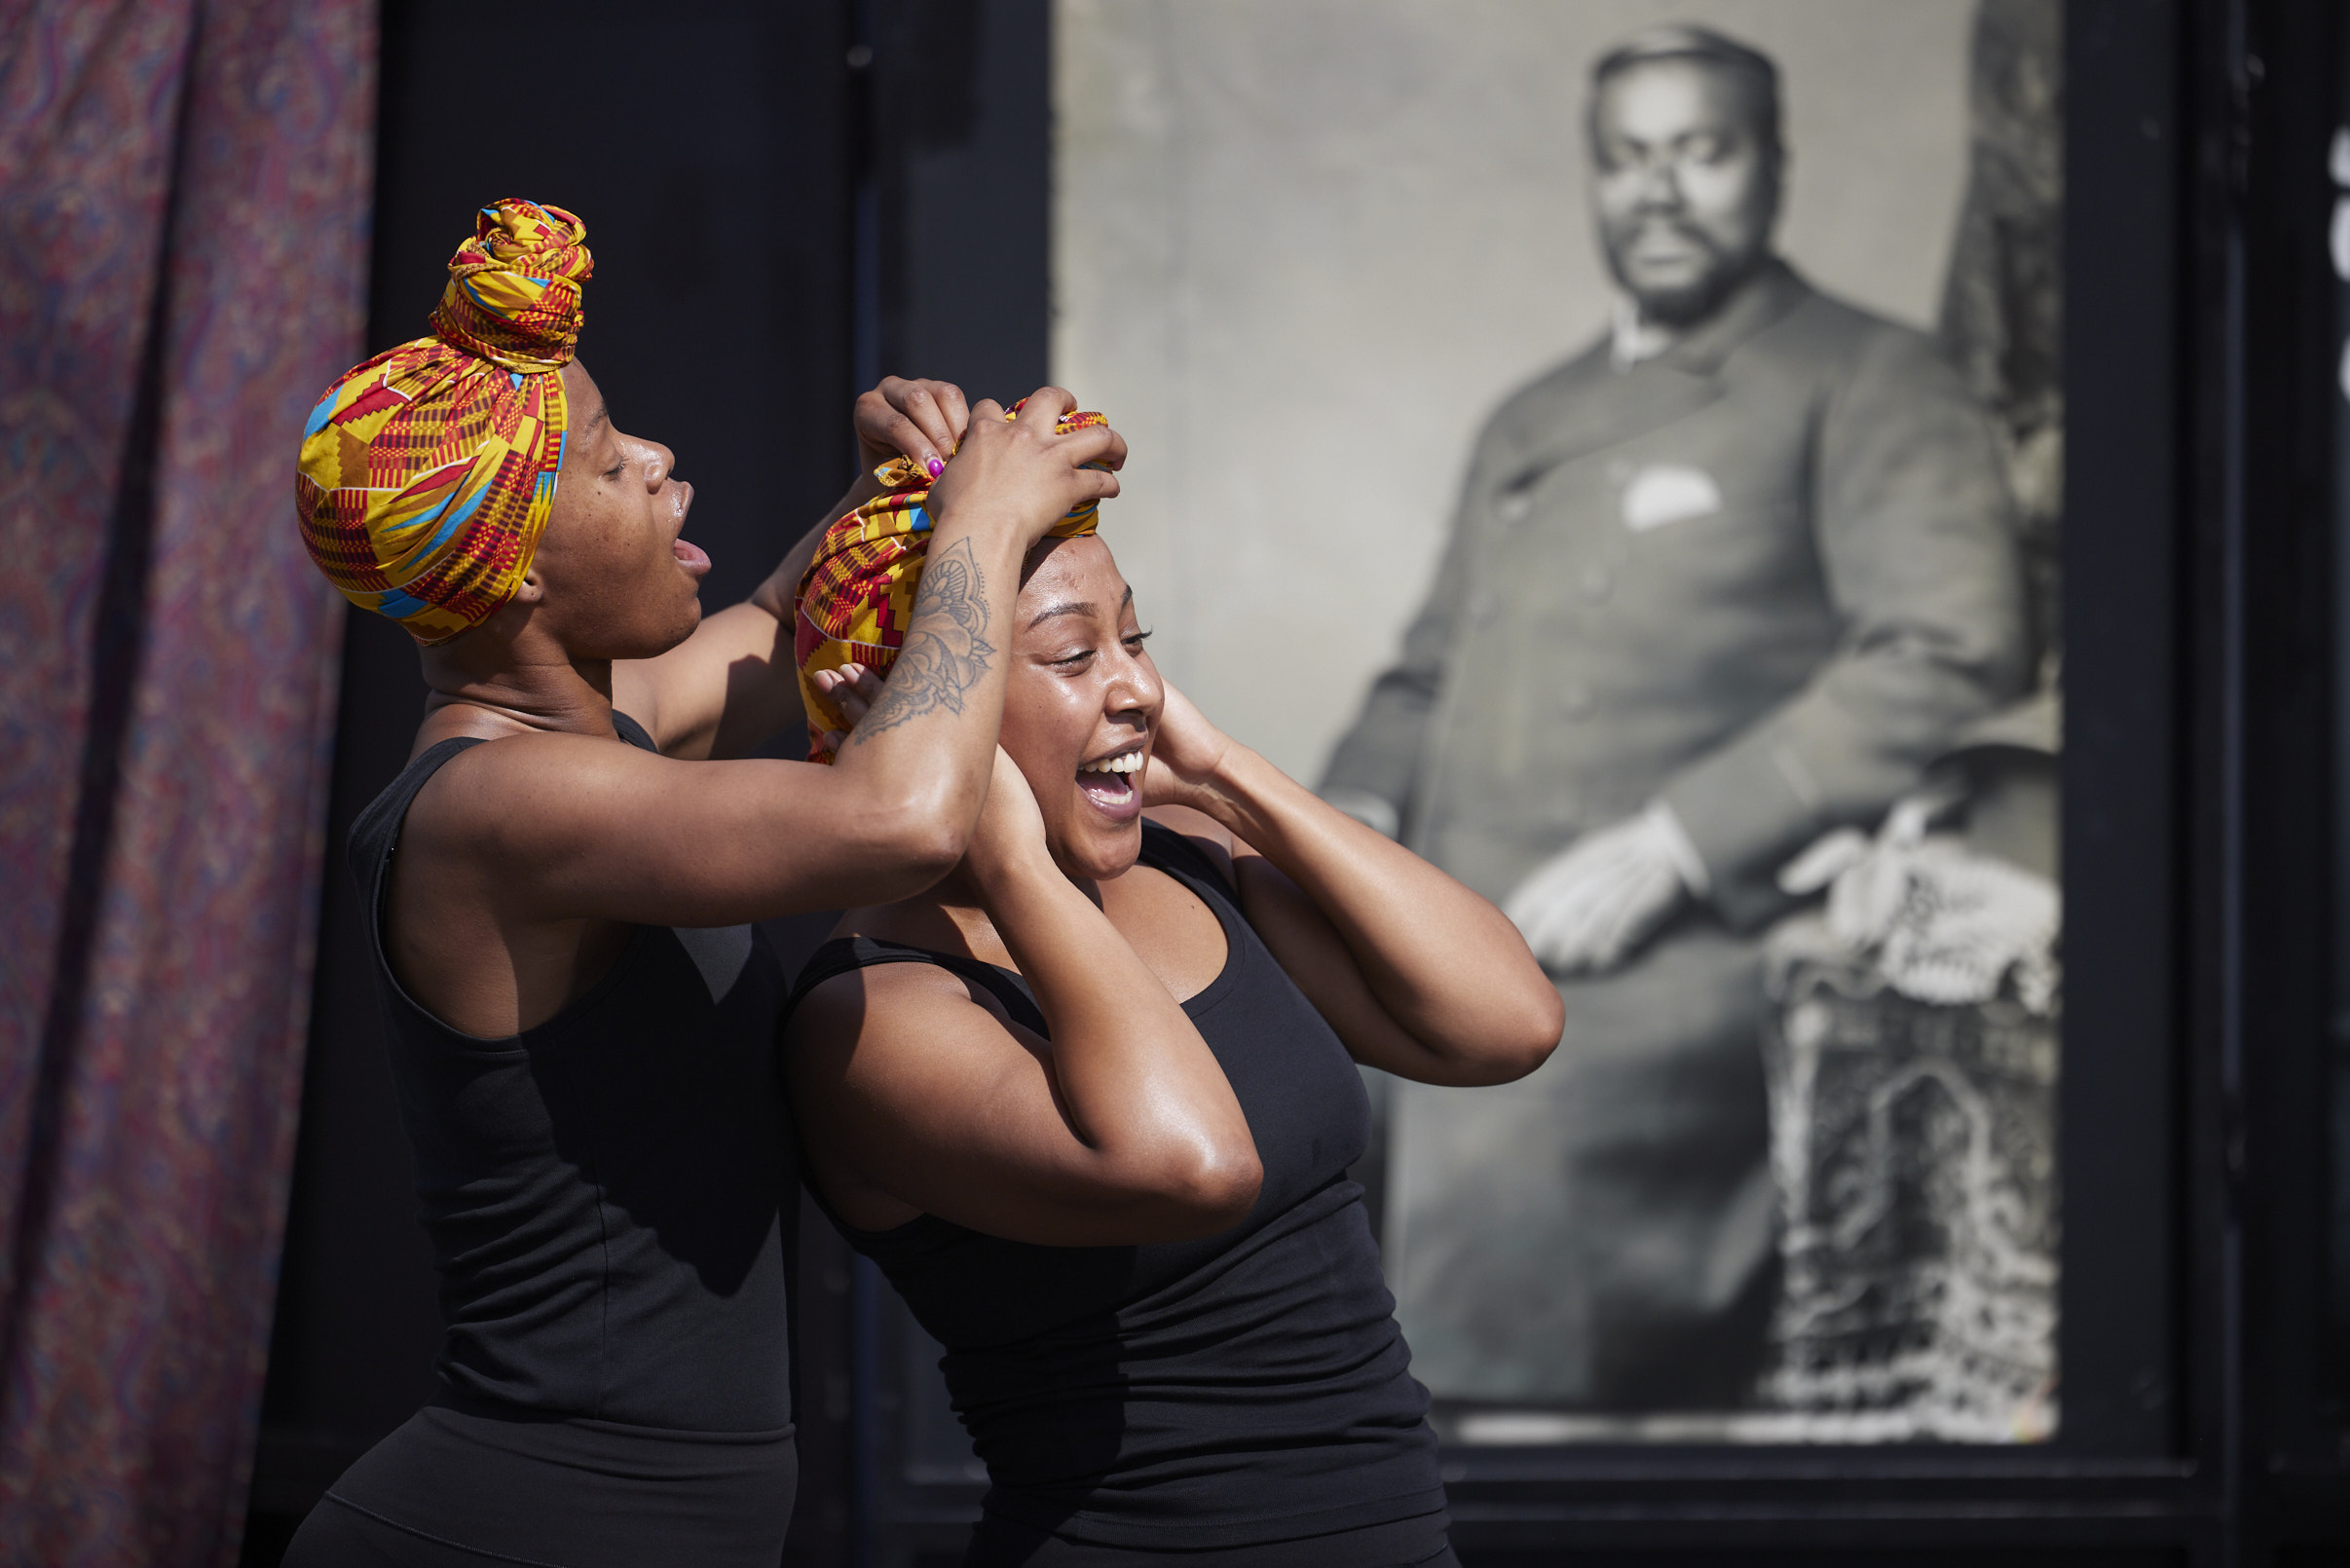 Two performers are interacting on stage. One is wearing a colourful head wrap while fixing the other's head wrap for them.